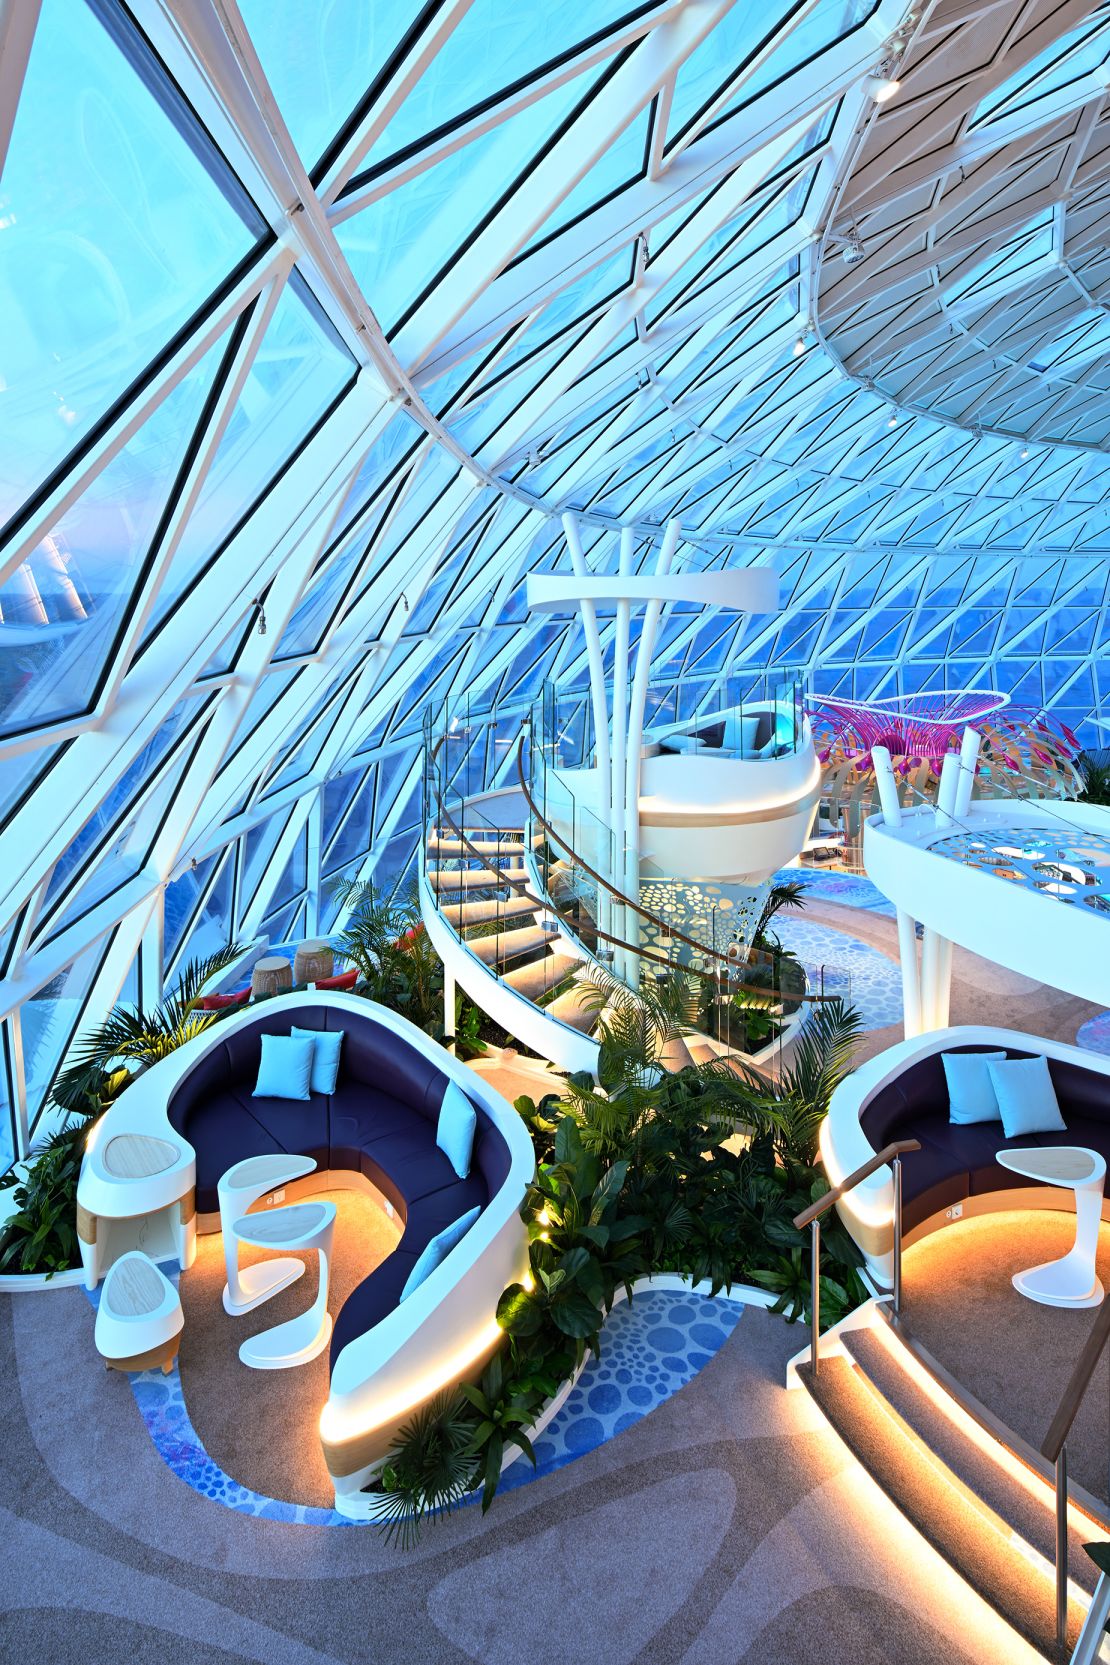 The Overlook Lounge, located inside the 82-foot-tall steel and glass AquaDome that crowns part of the top of the ship, has elevated seating pods.